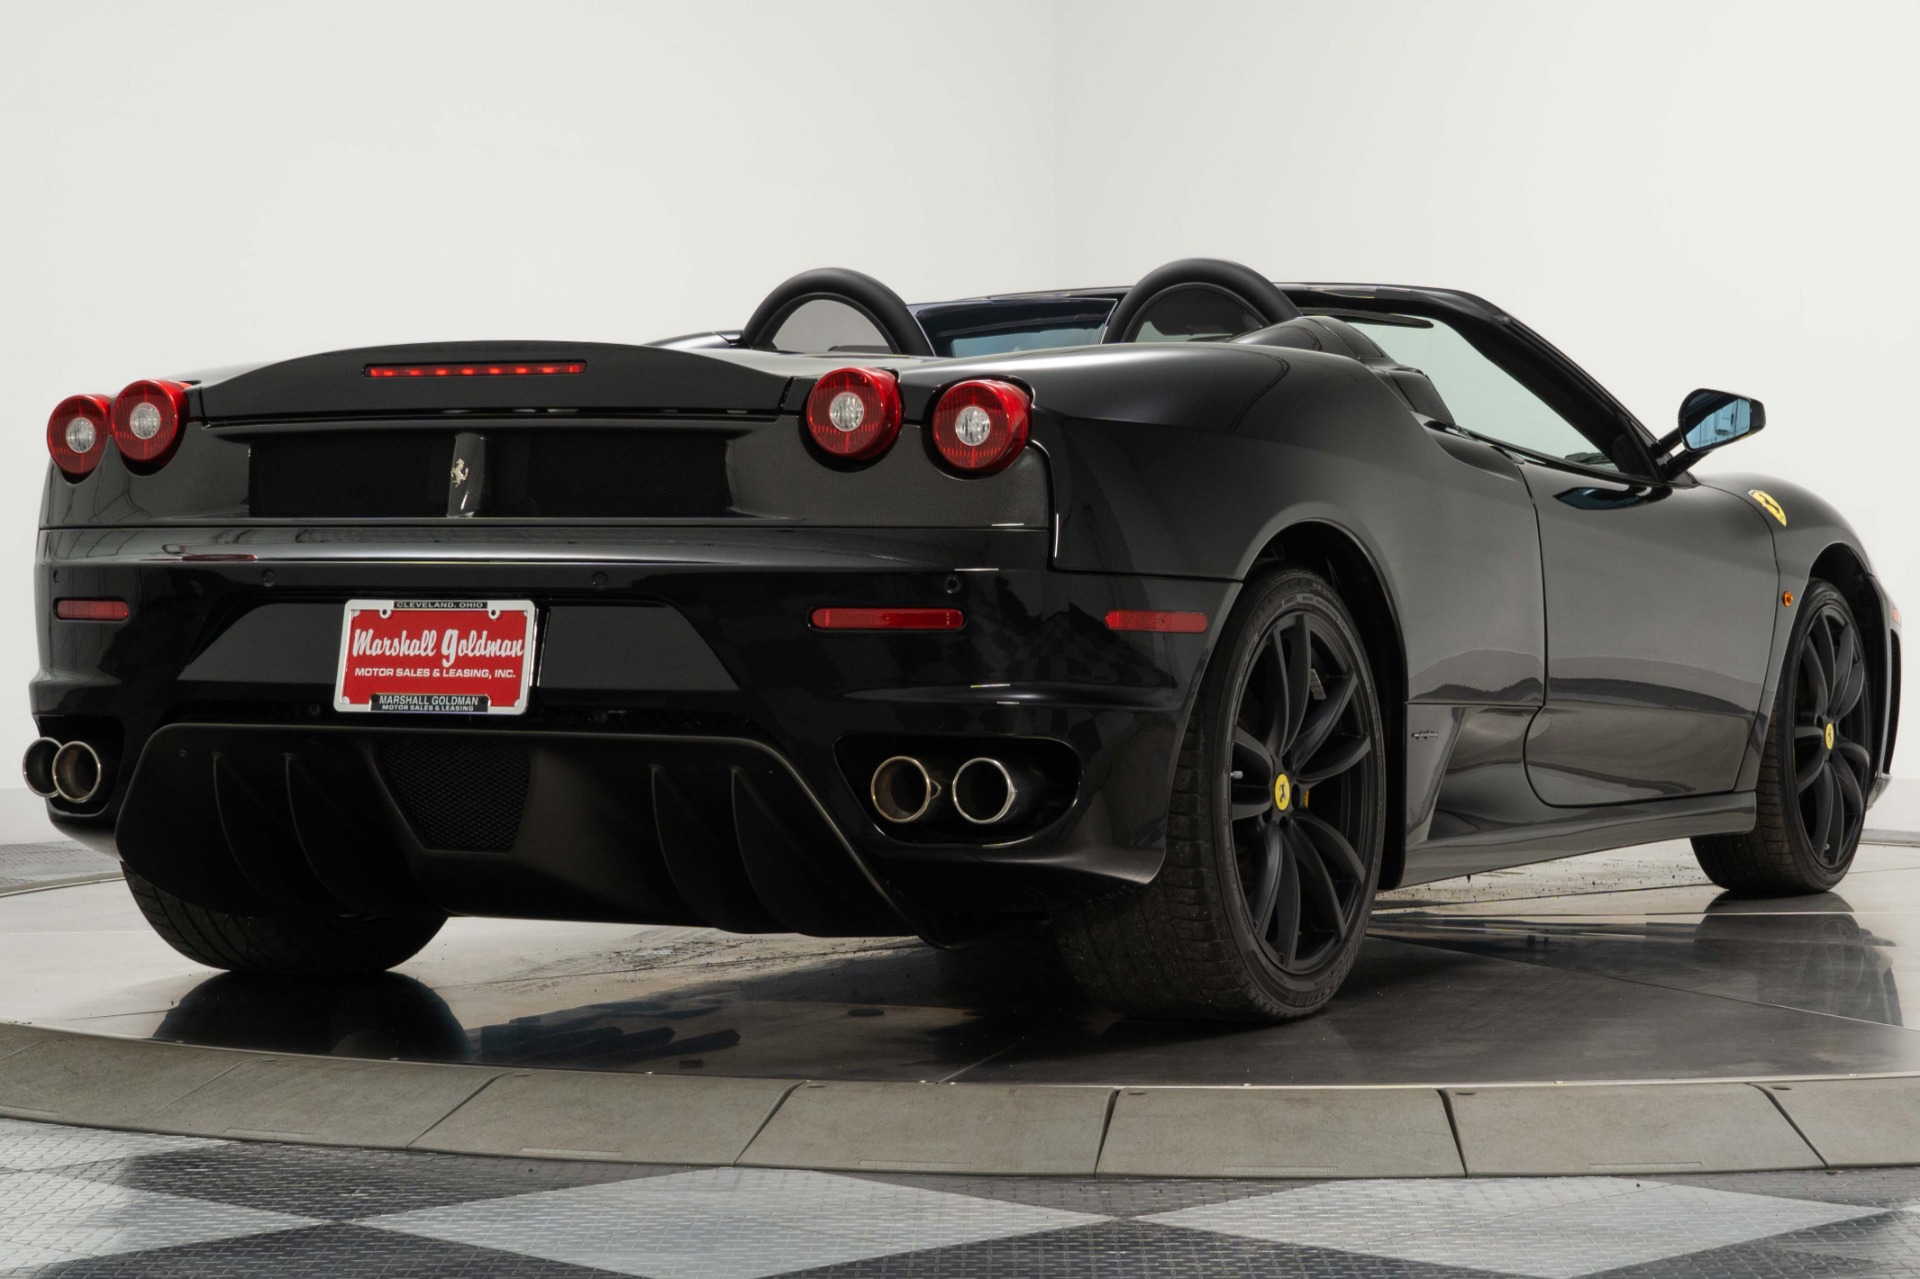 Used 2007 Ferrari F430 Spider For Sale Sold Marshall Goldman Cleveland Stock W20942